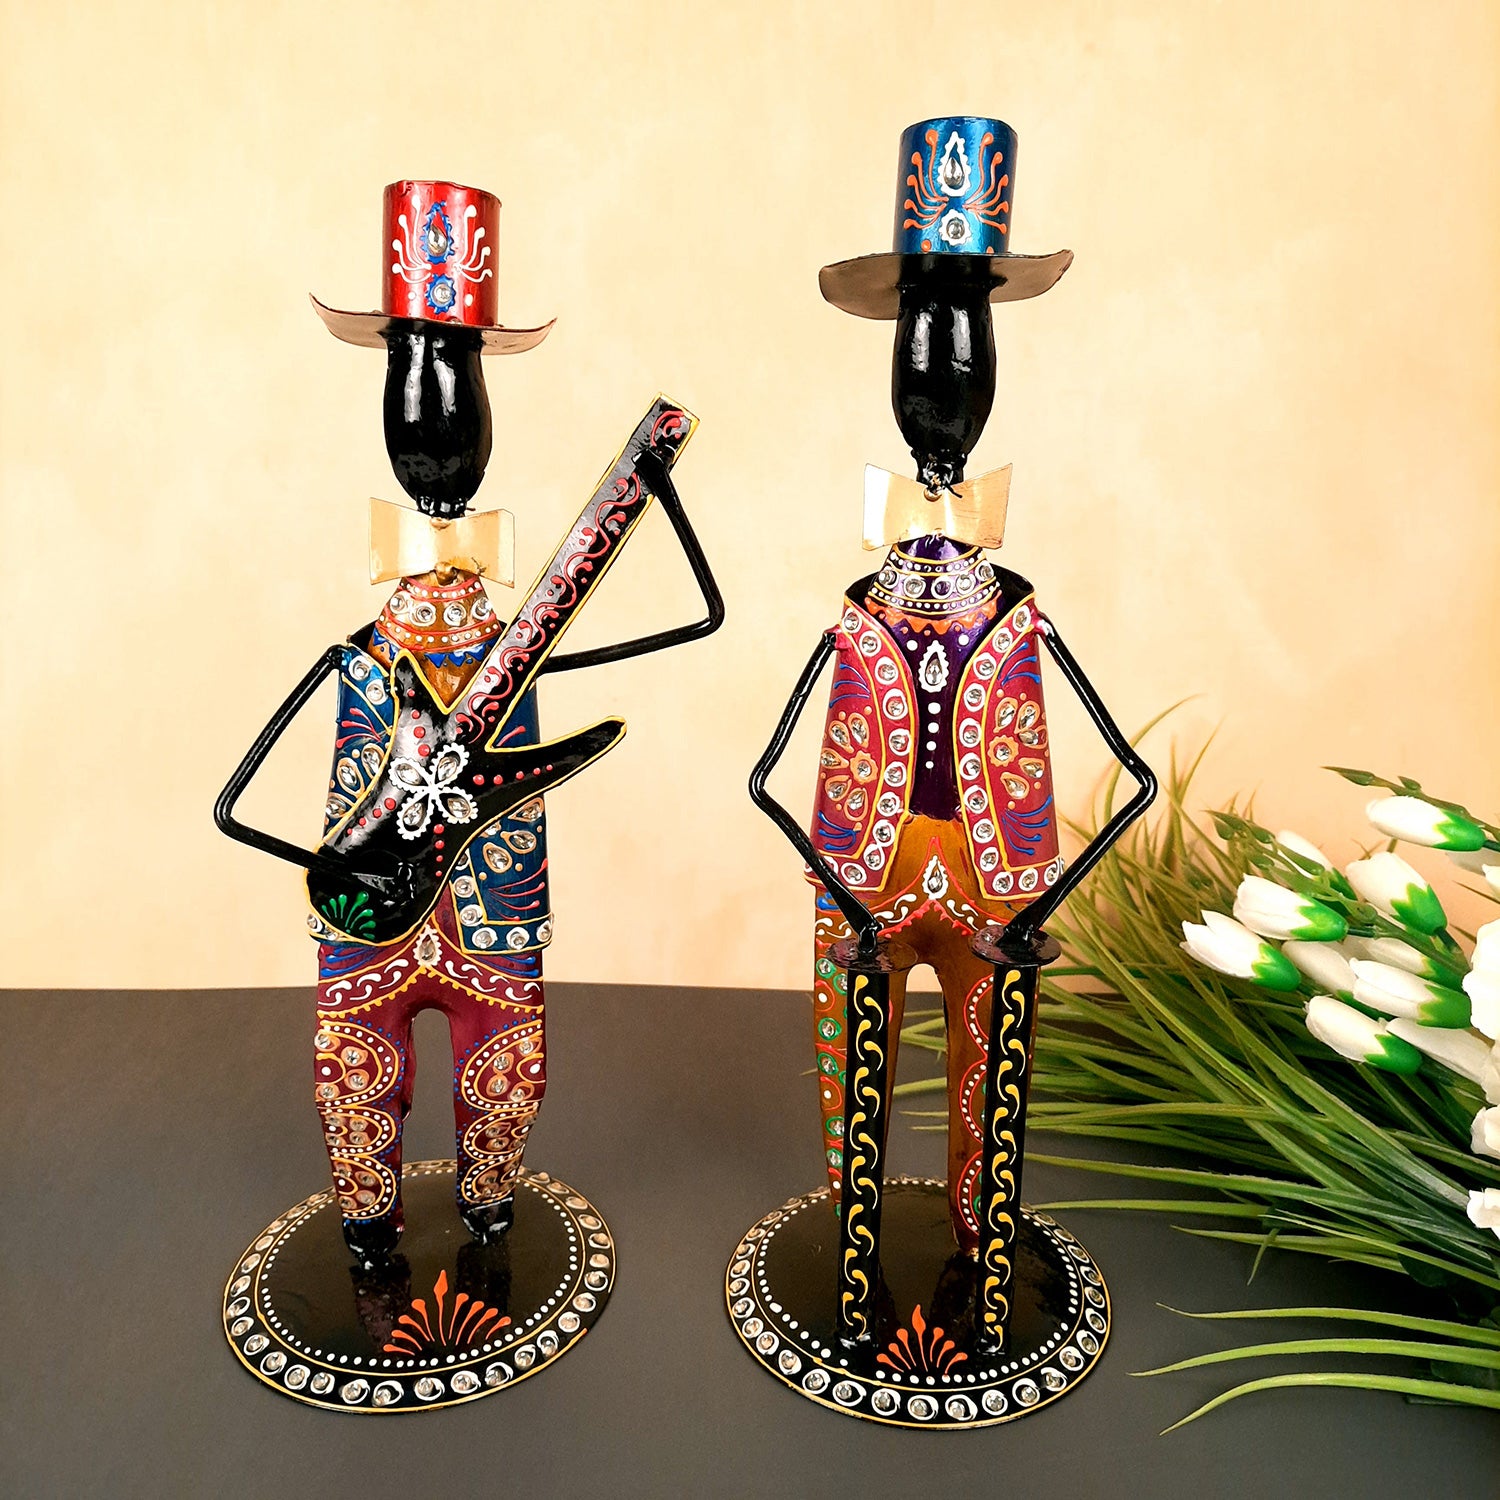 Showpiece Set - Musician Design | Figurines Playing Musical Instruments With Kundan Work - for Home, Bedroom, Living Room, Office Desk & Table & Gifts - 18 Inch (Set of 2)